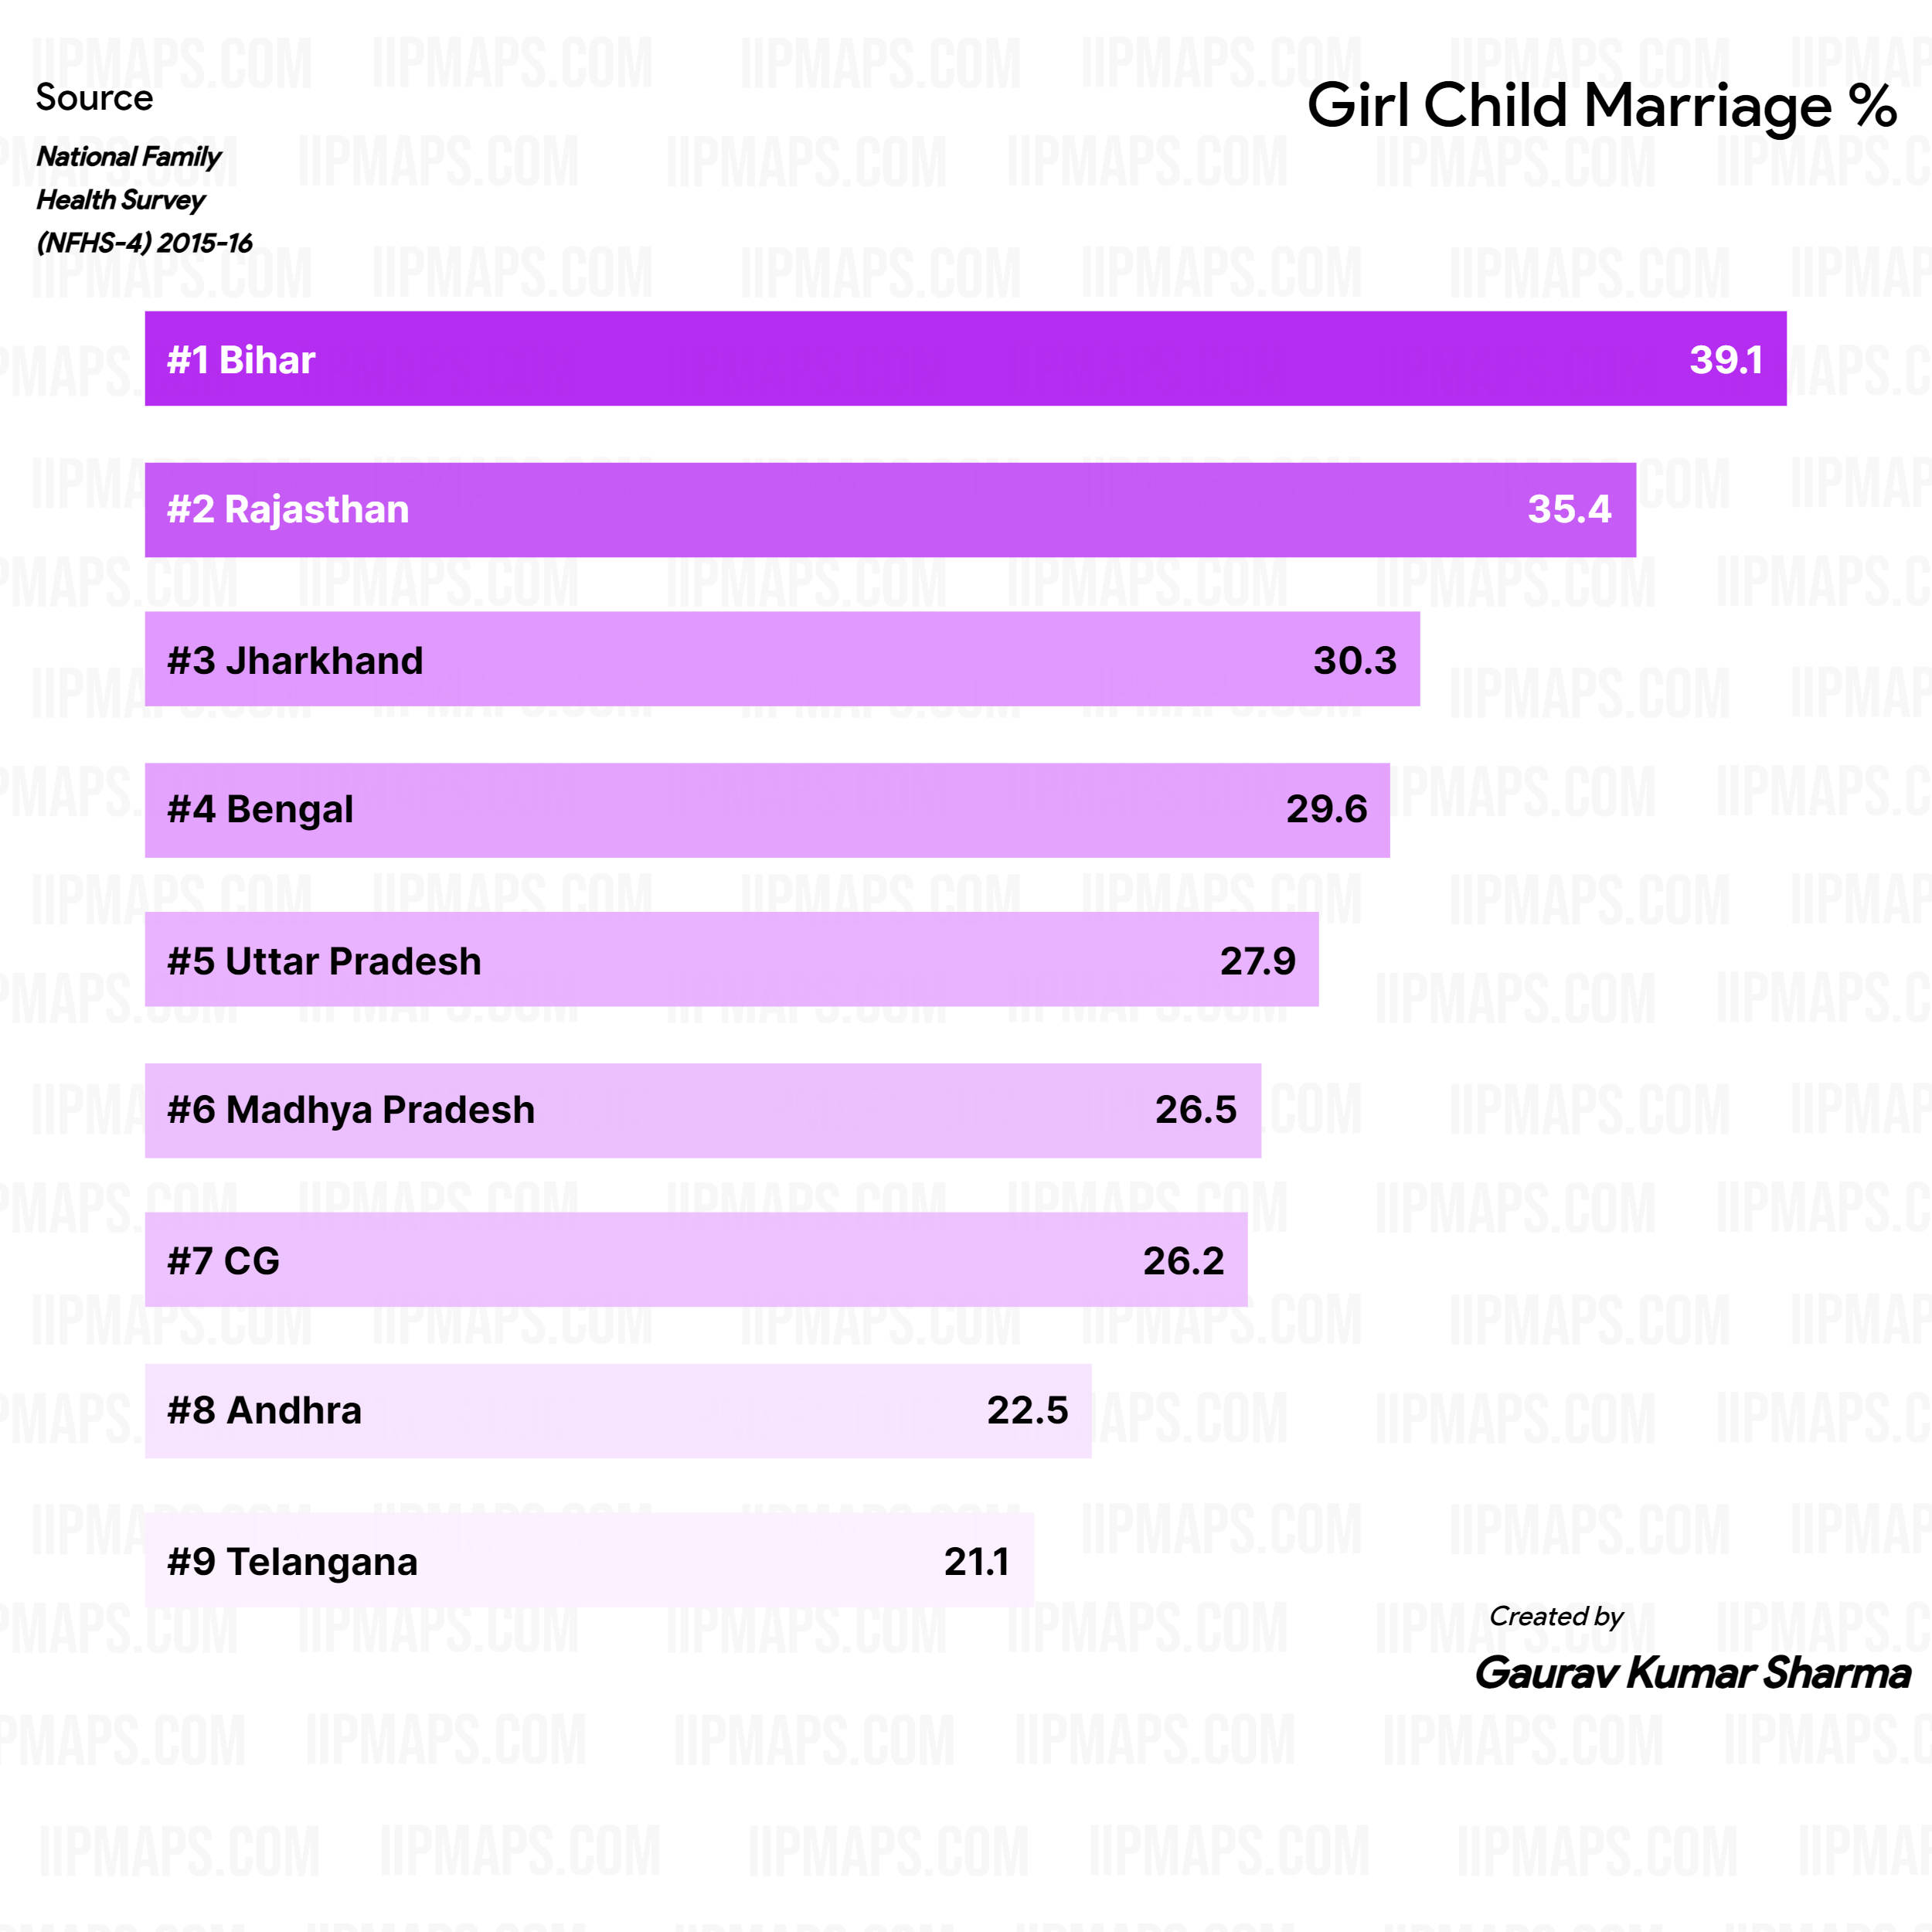 Girl Child Marriage